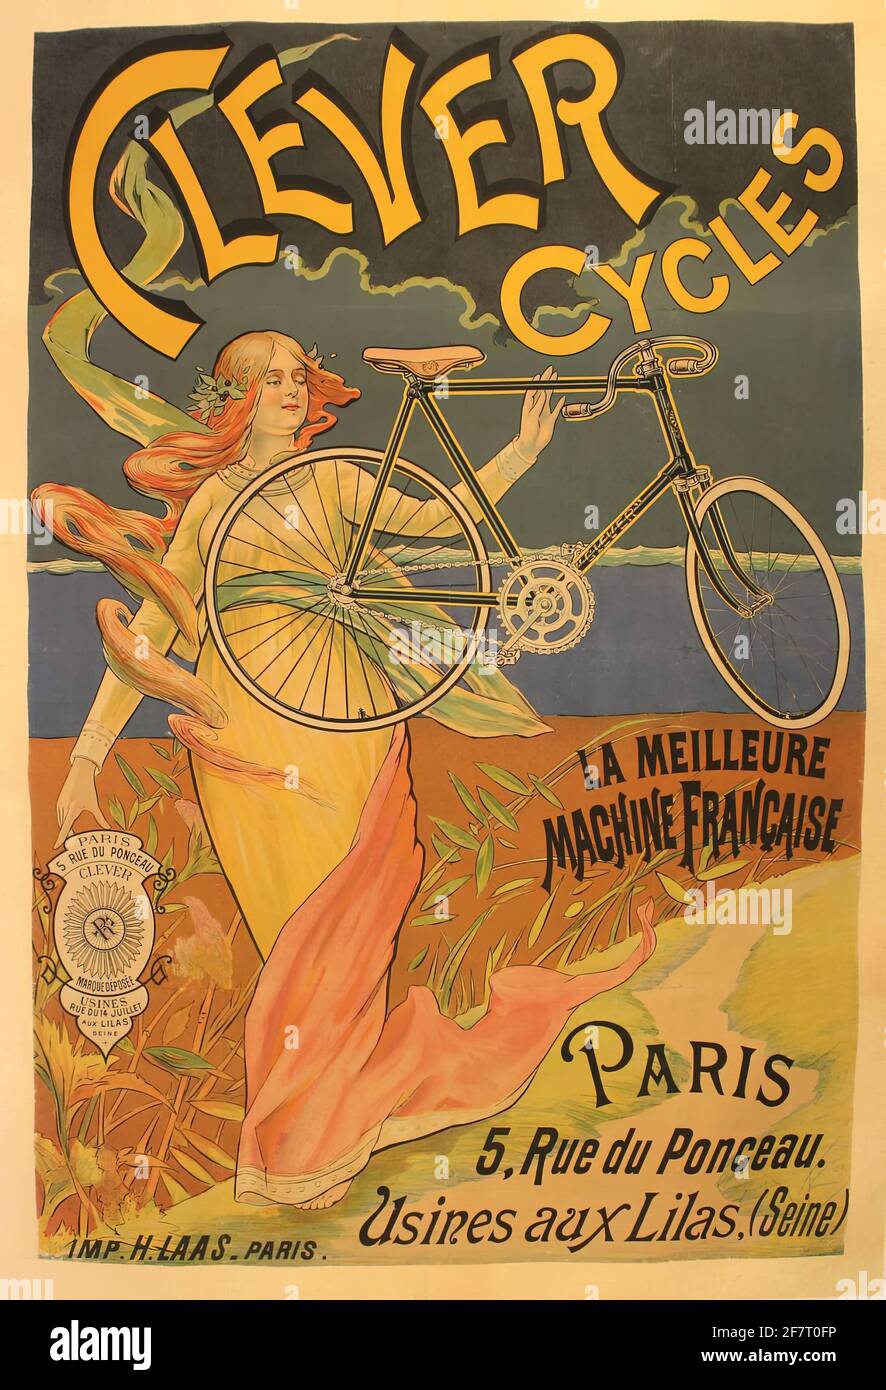 An old advertising poster for Clever Cycles in Paris Stock Photo